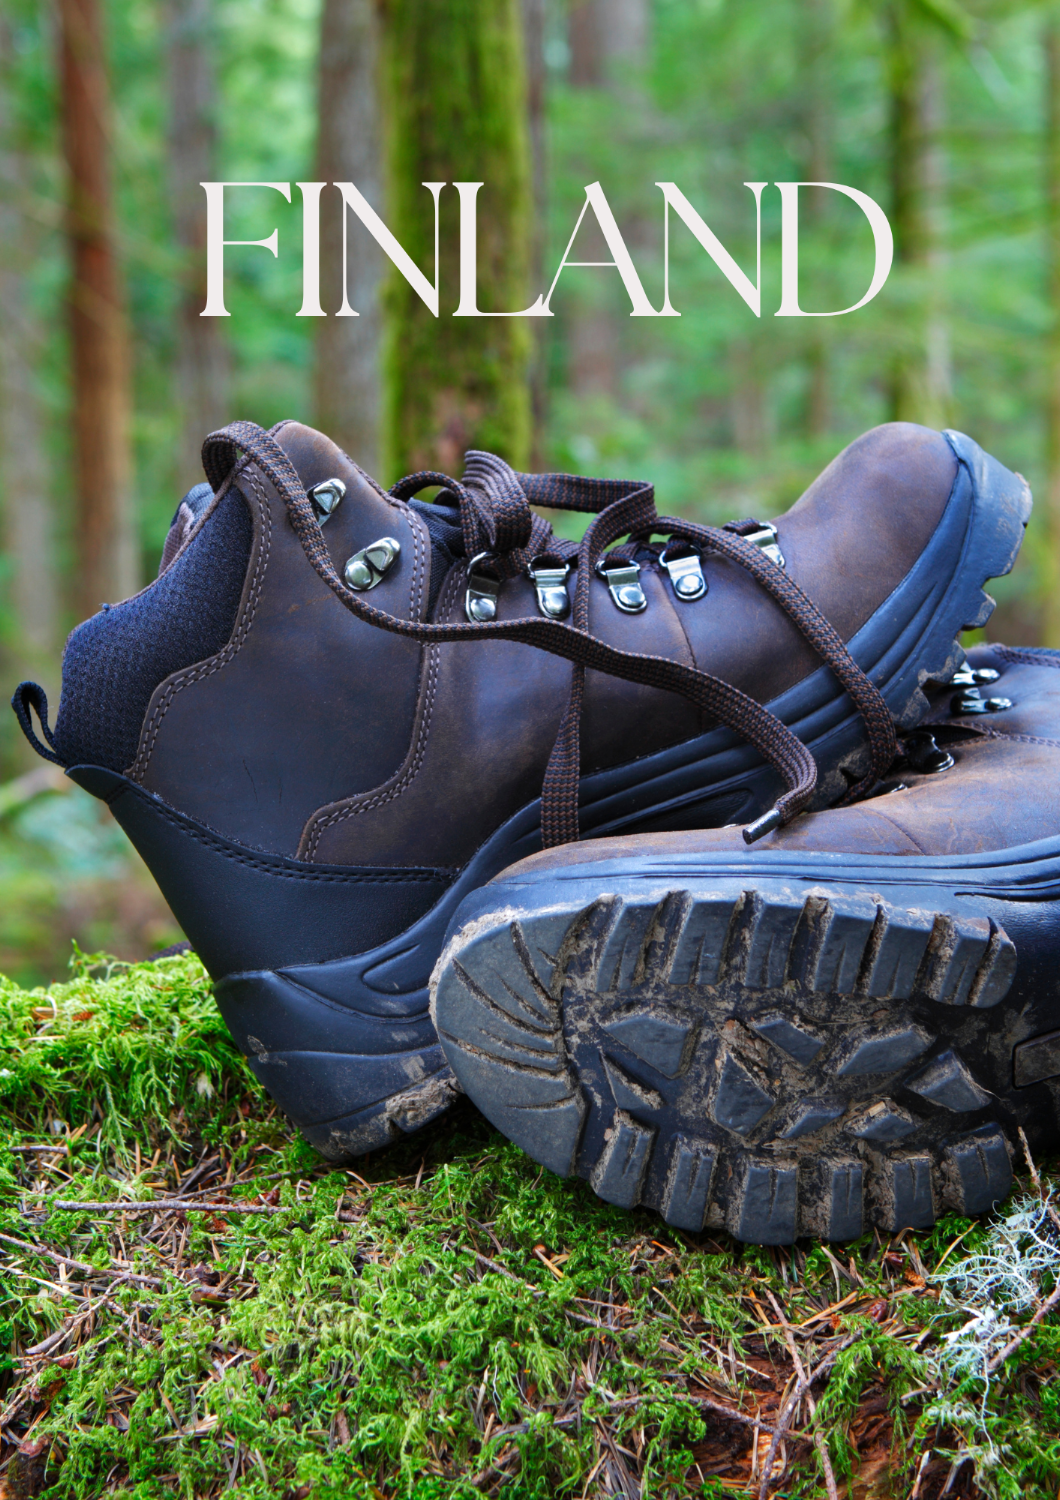 National Parks in Finland